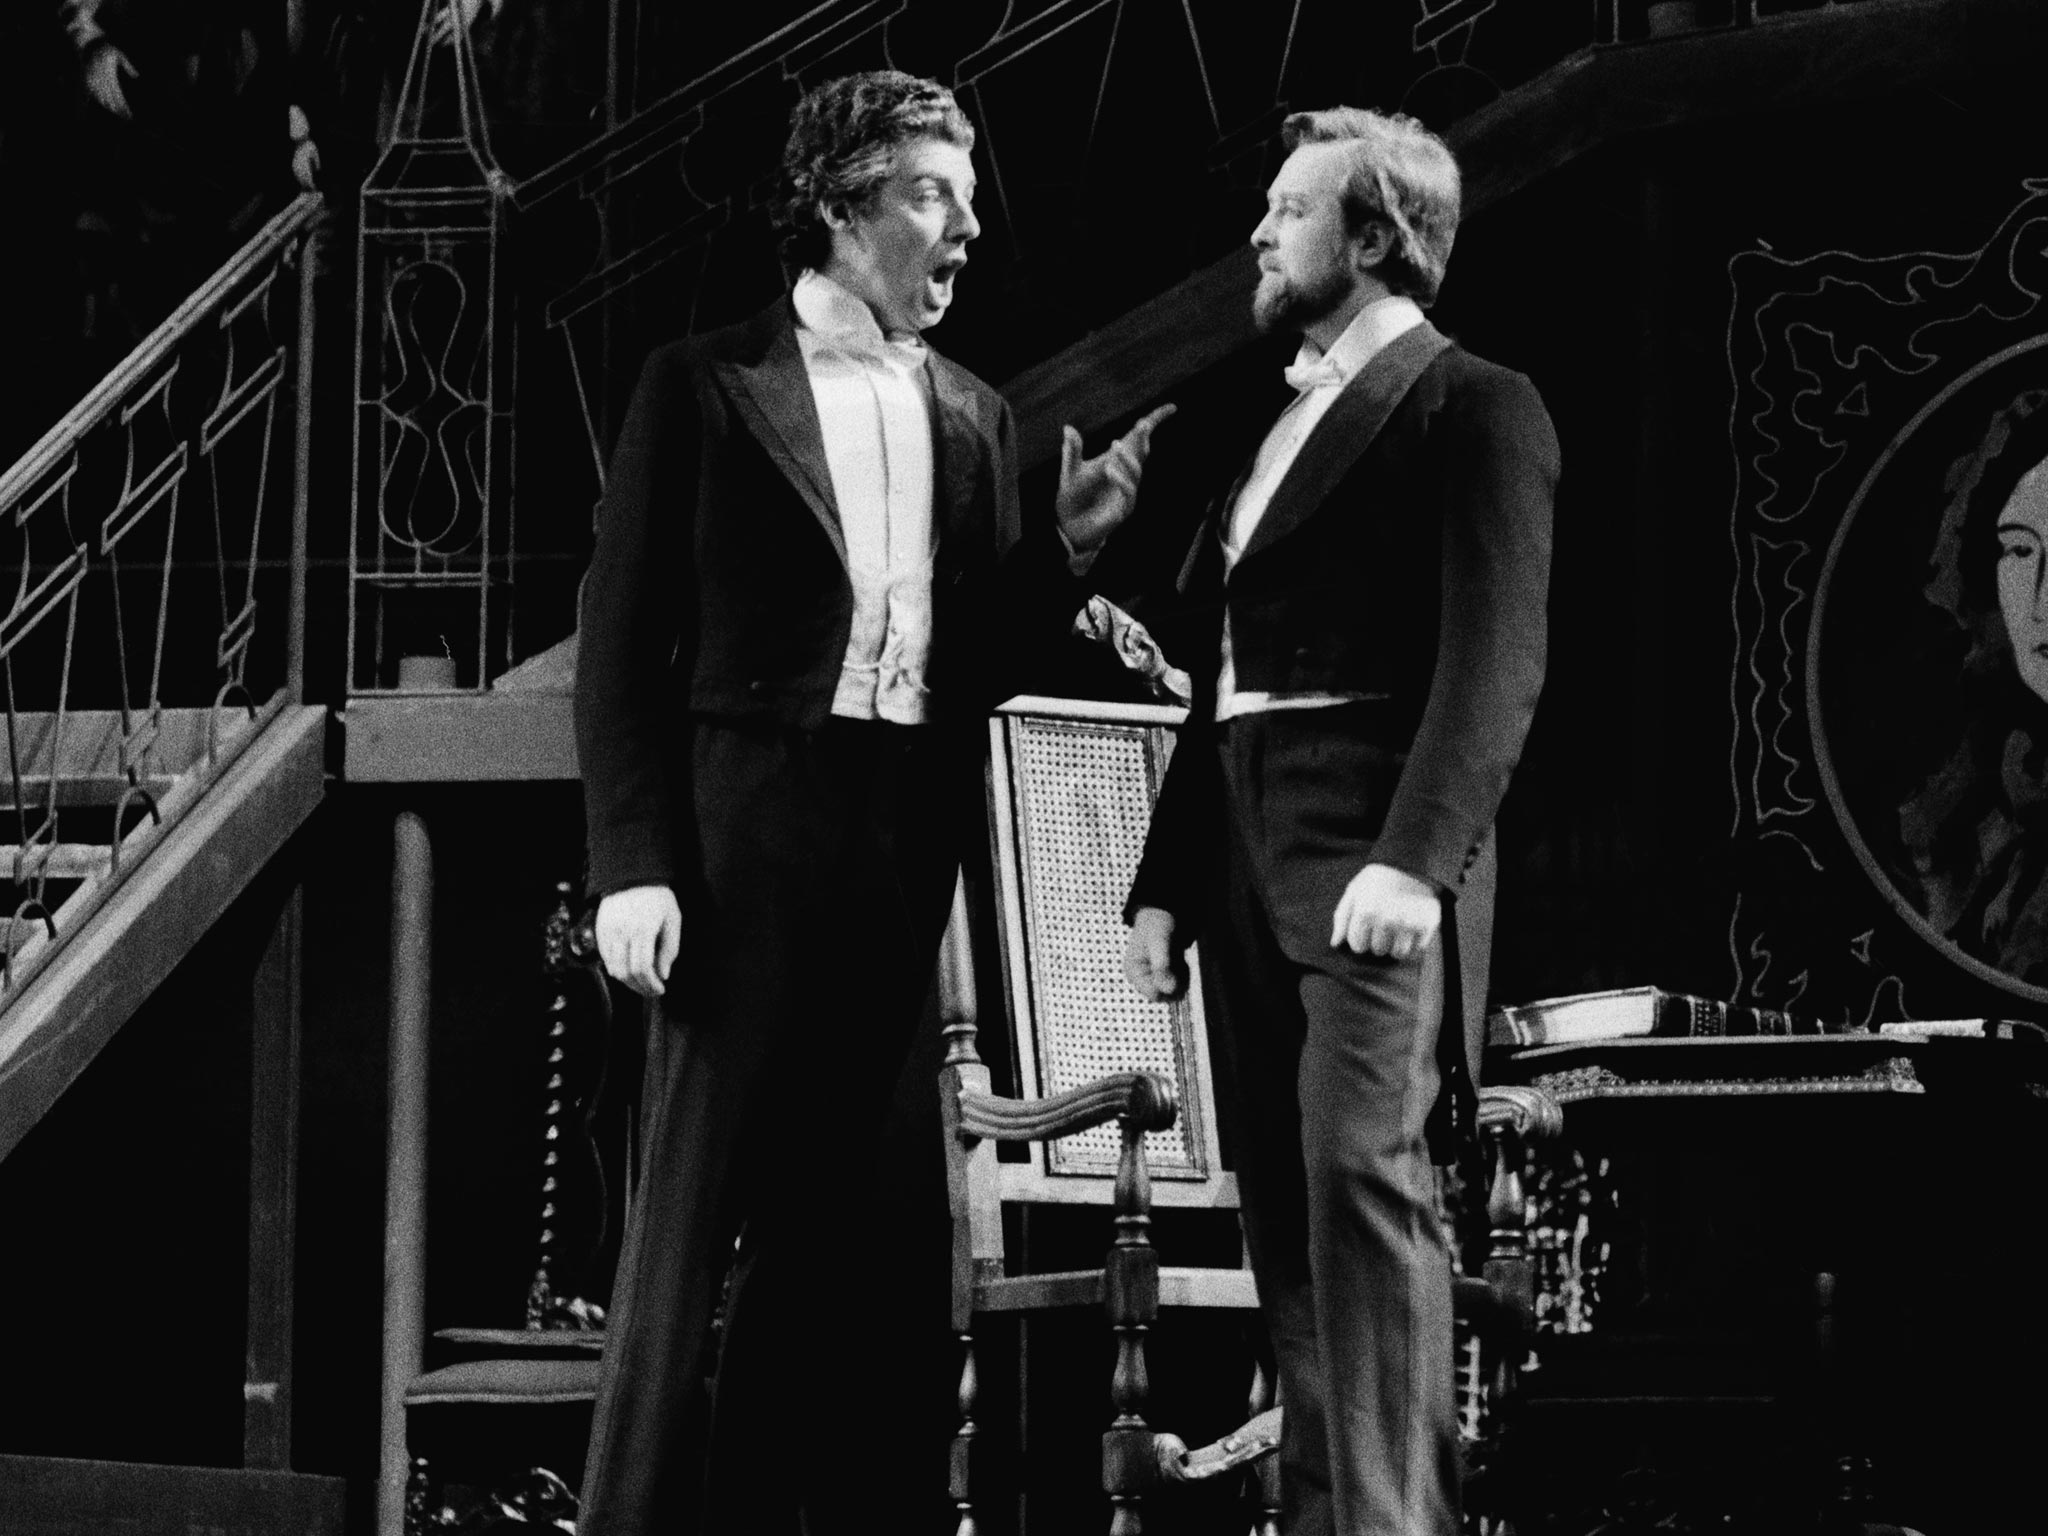 John Shirley-Quirk (left) with Benjamin Luxon in a rehearsal for the stage premiere of Benjamin Britten's opera 'Owen Wingrave' at the Royal Opera House in 1973